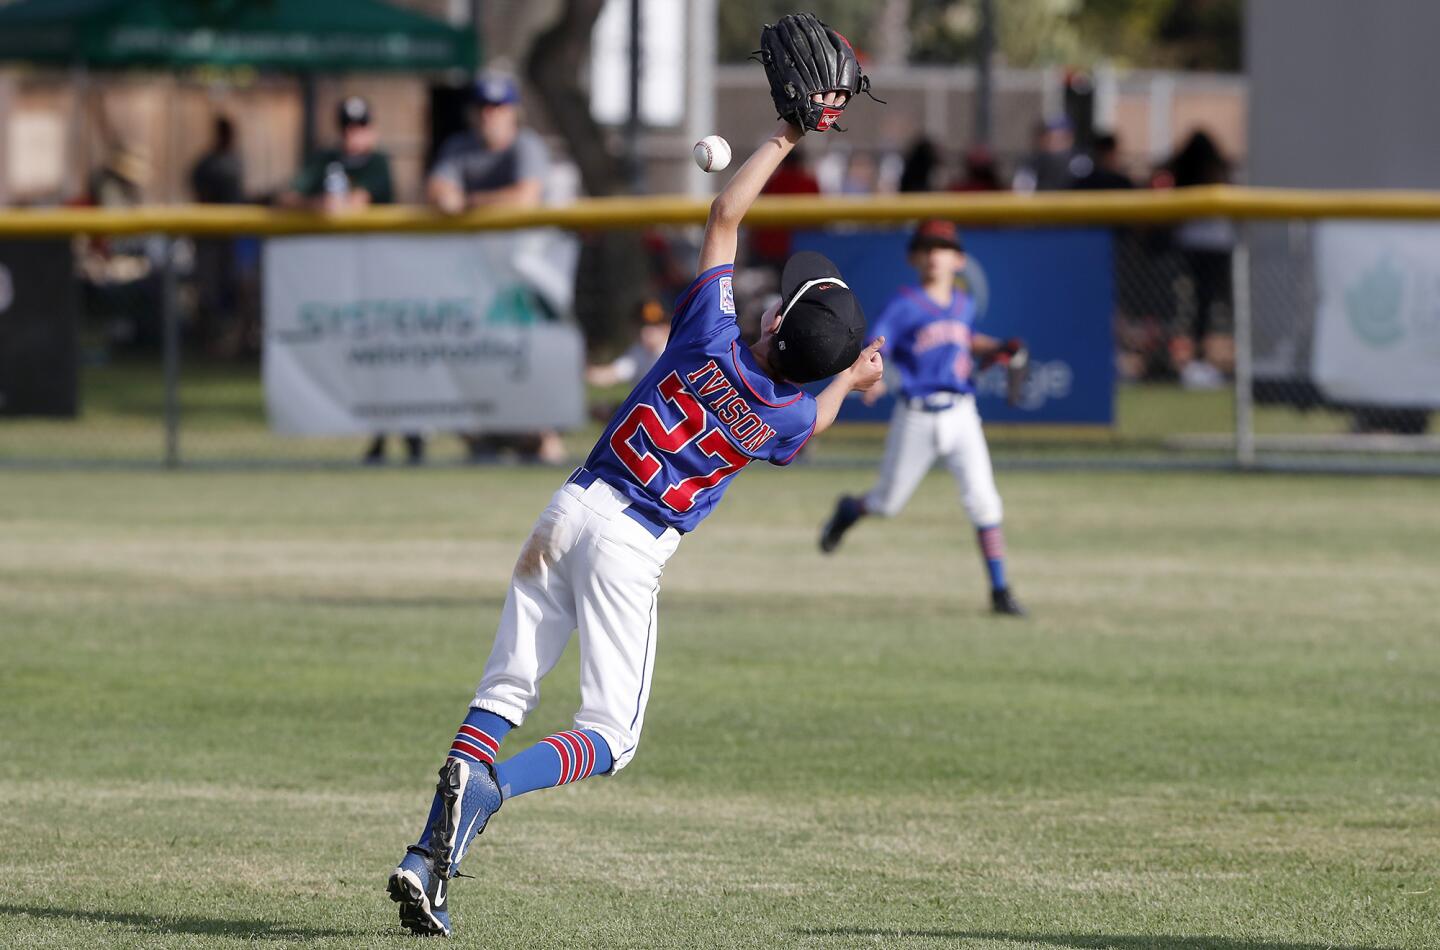 Photo Gallery: Huntington Valley Little League No. 1 vs. Seaview Little League No. 2 in the District 62 Tournament of Champions